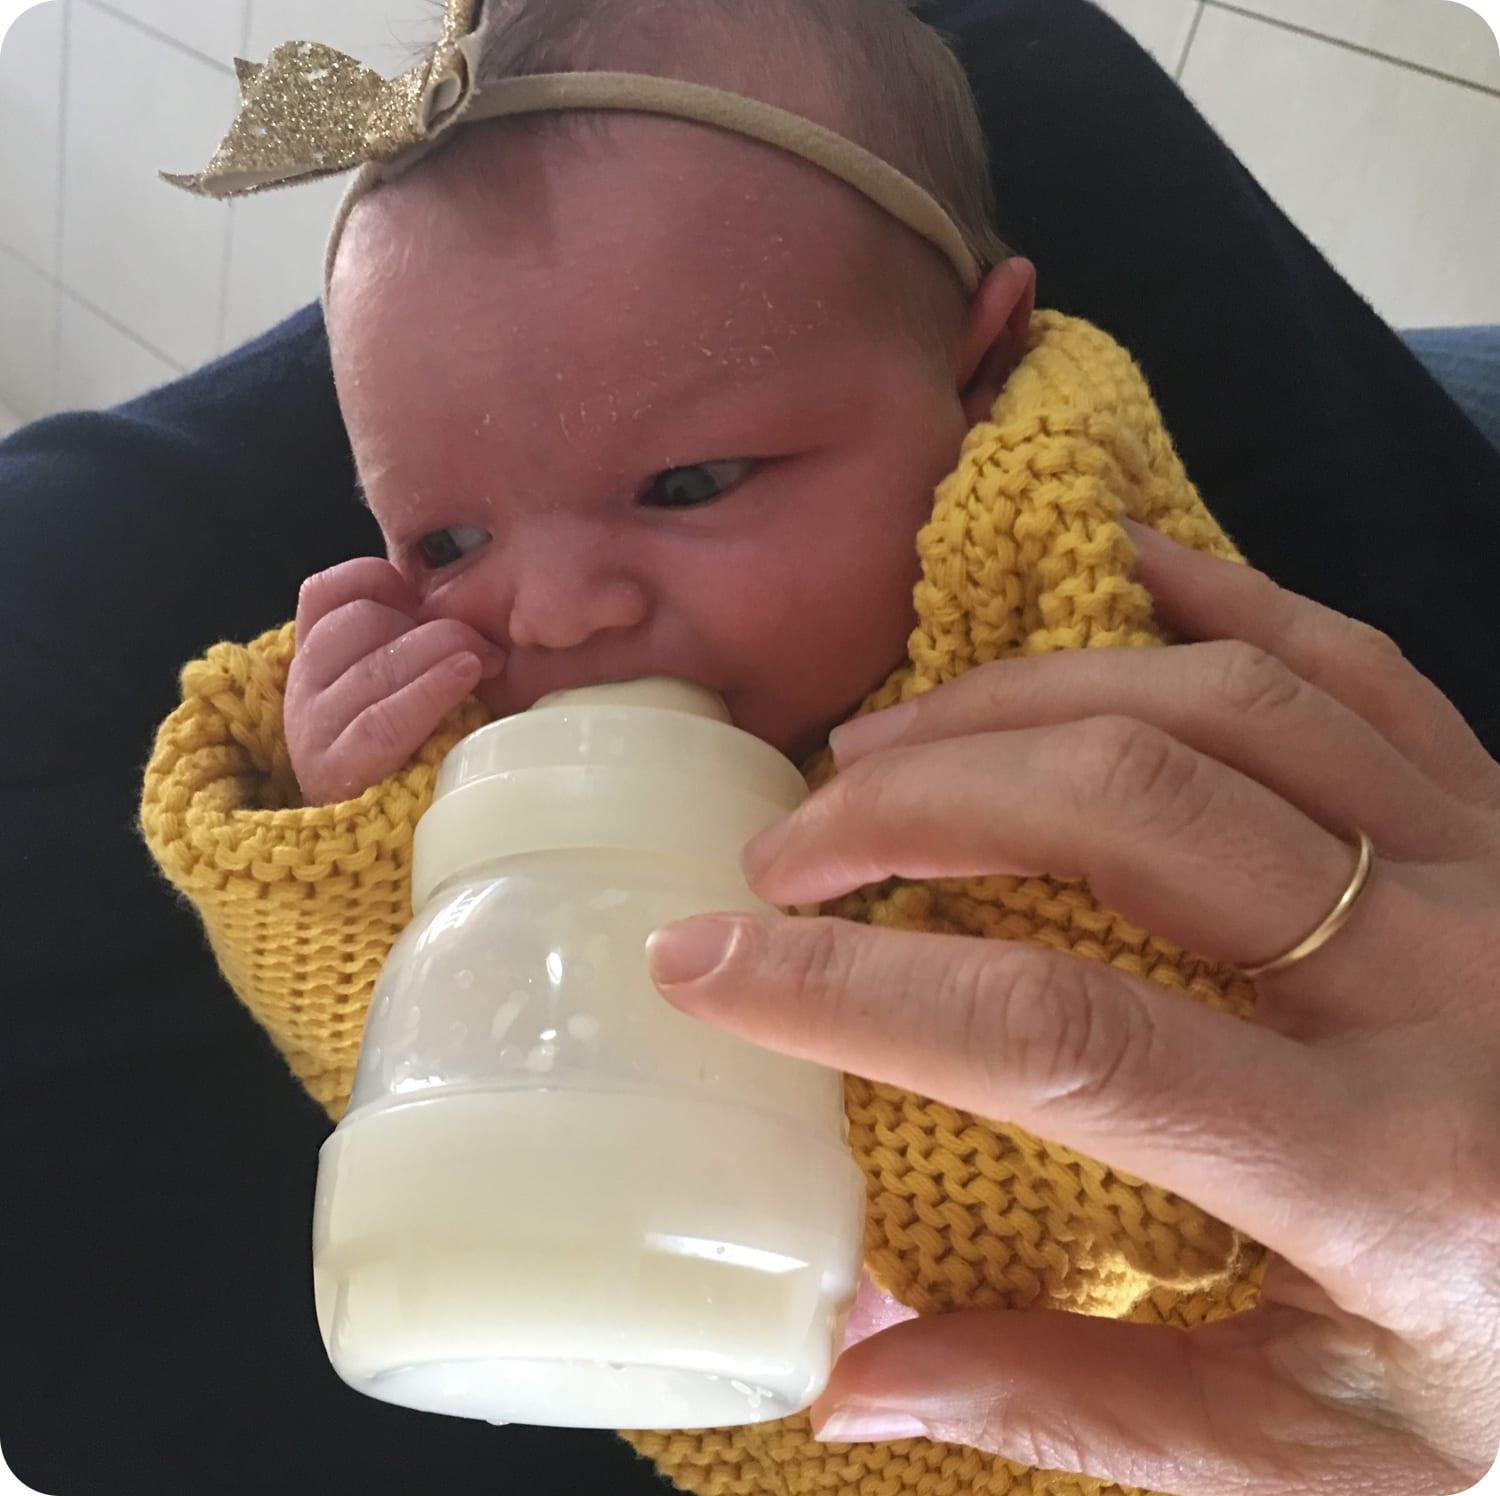 Young Baby Being Bottle Fed